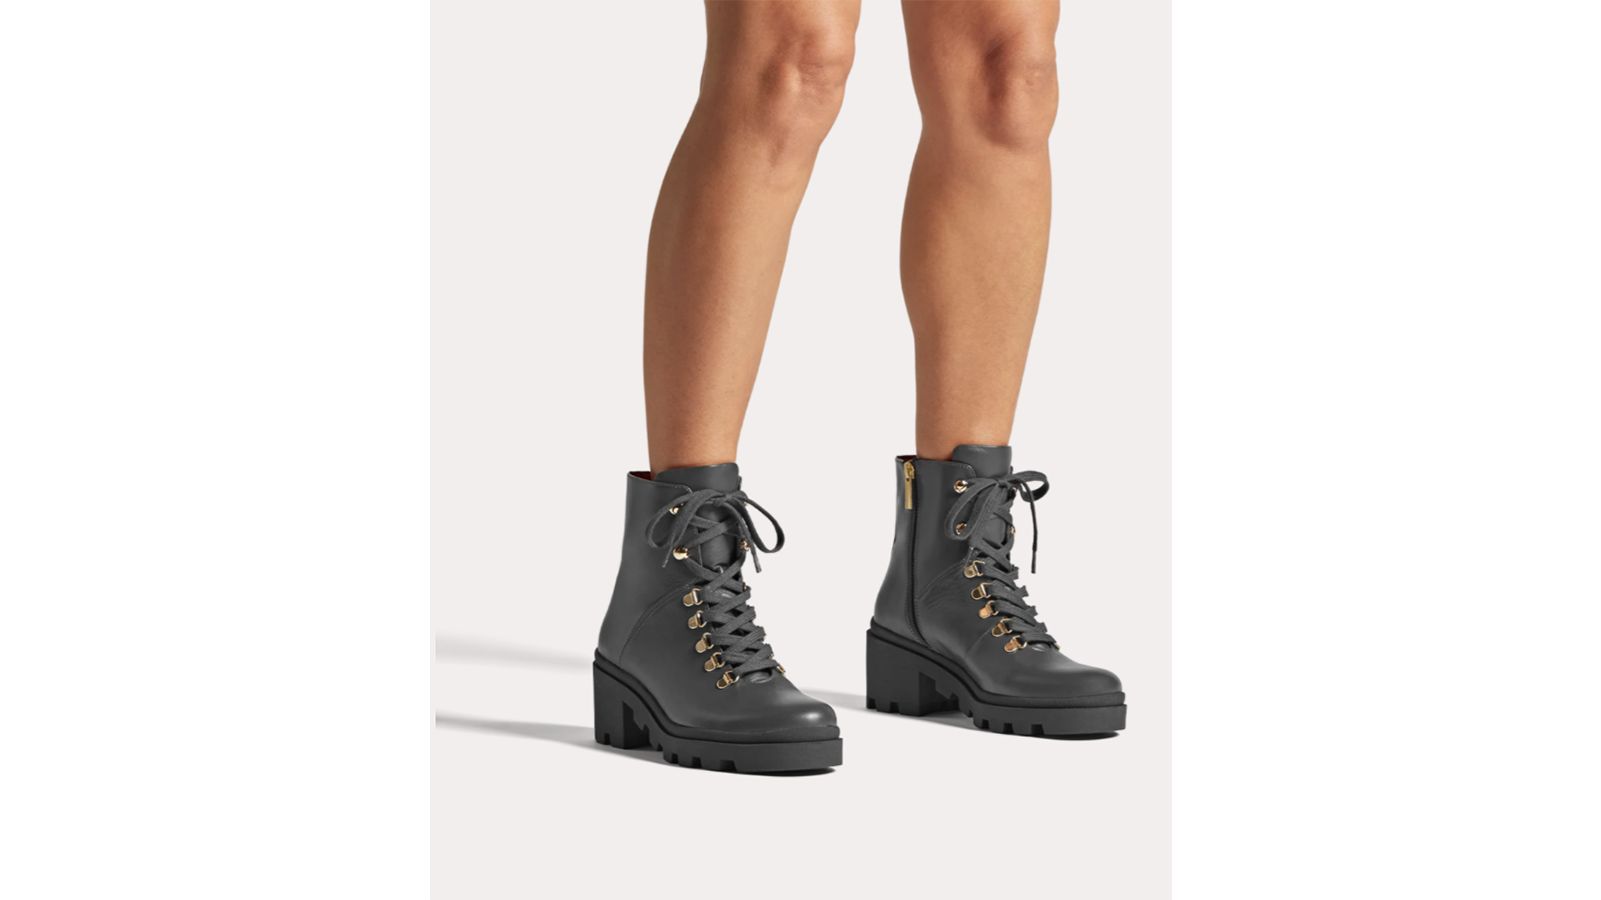 I Made It My Mission To Find Wide-Calf Boots That Are Actually Cute